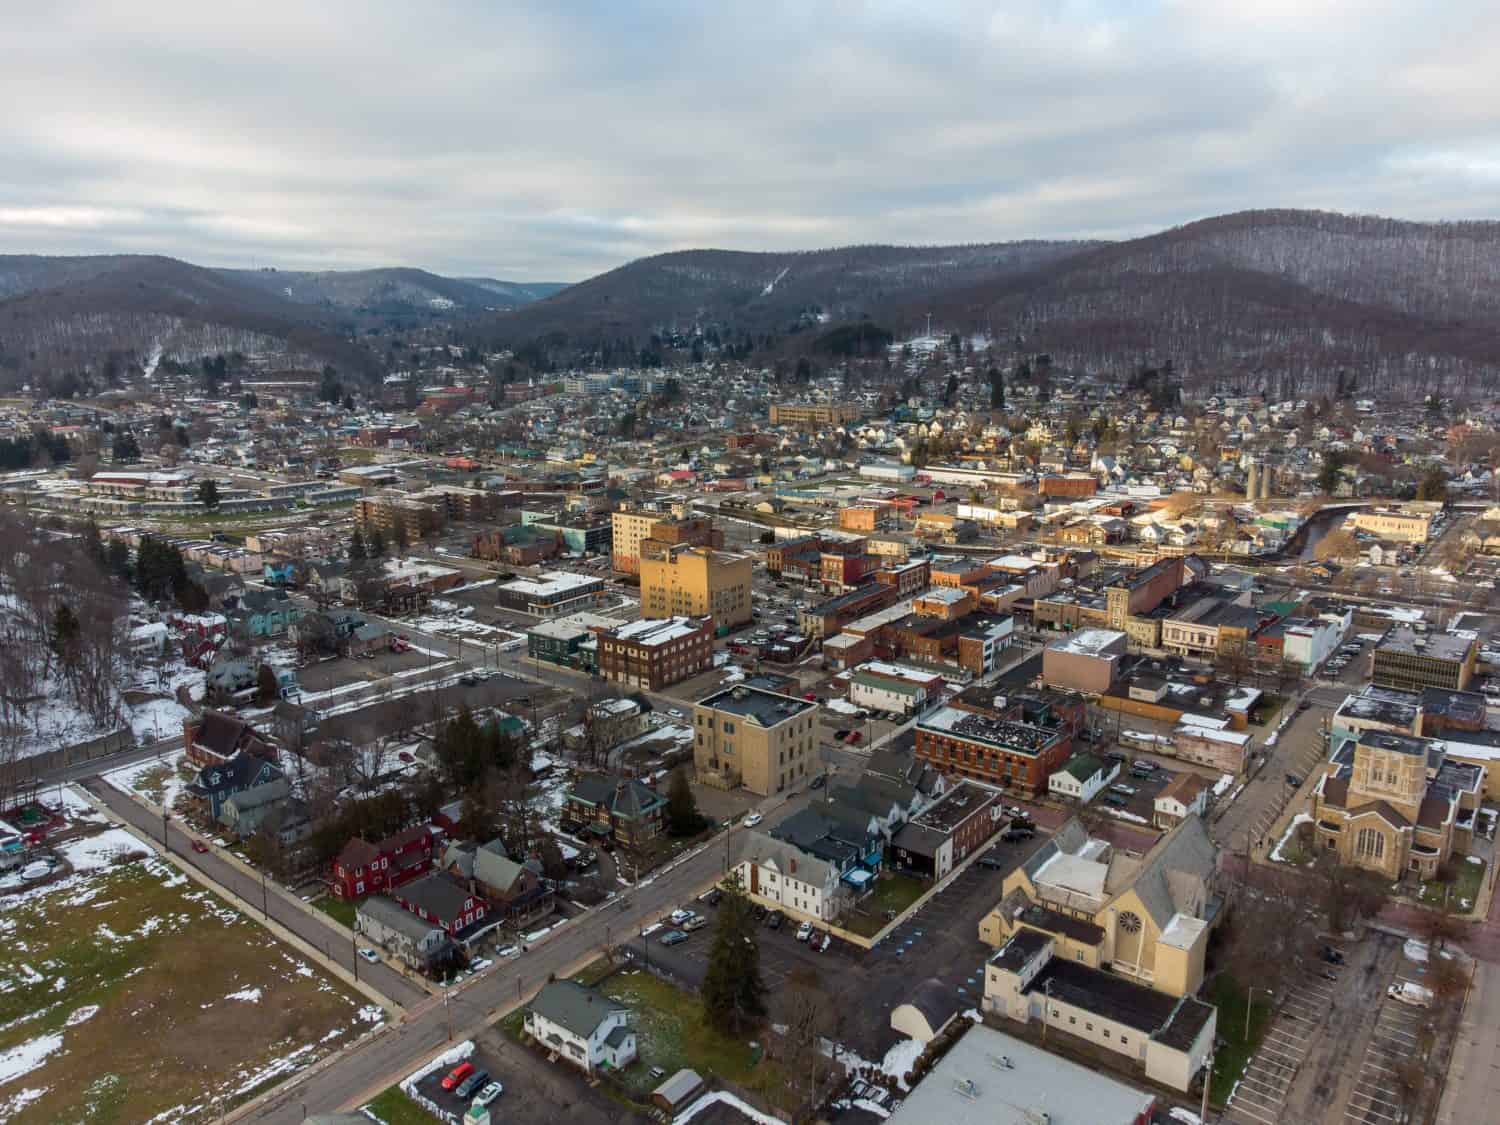 A beautiful aerial view of the city of Bradford, Pennsylvania in the winter.